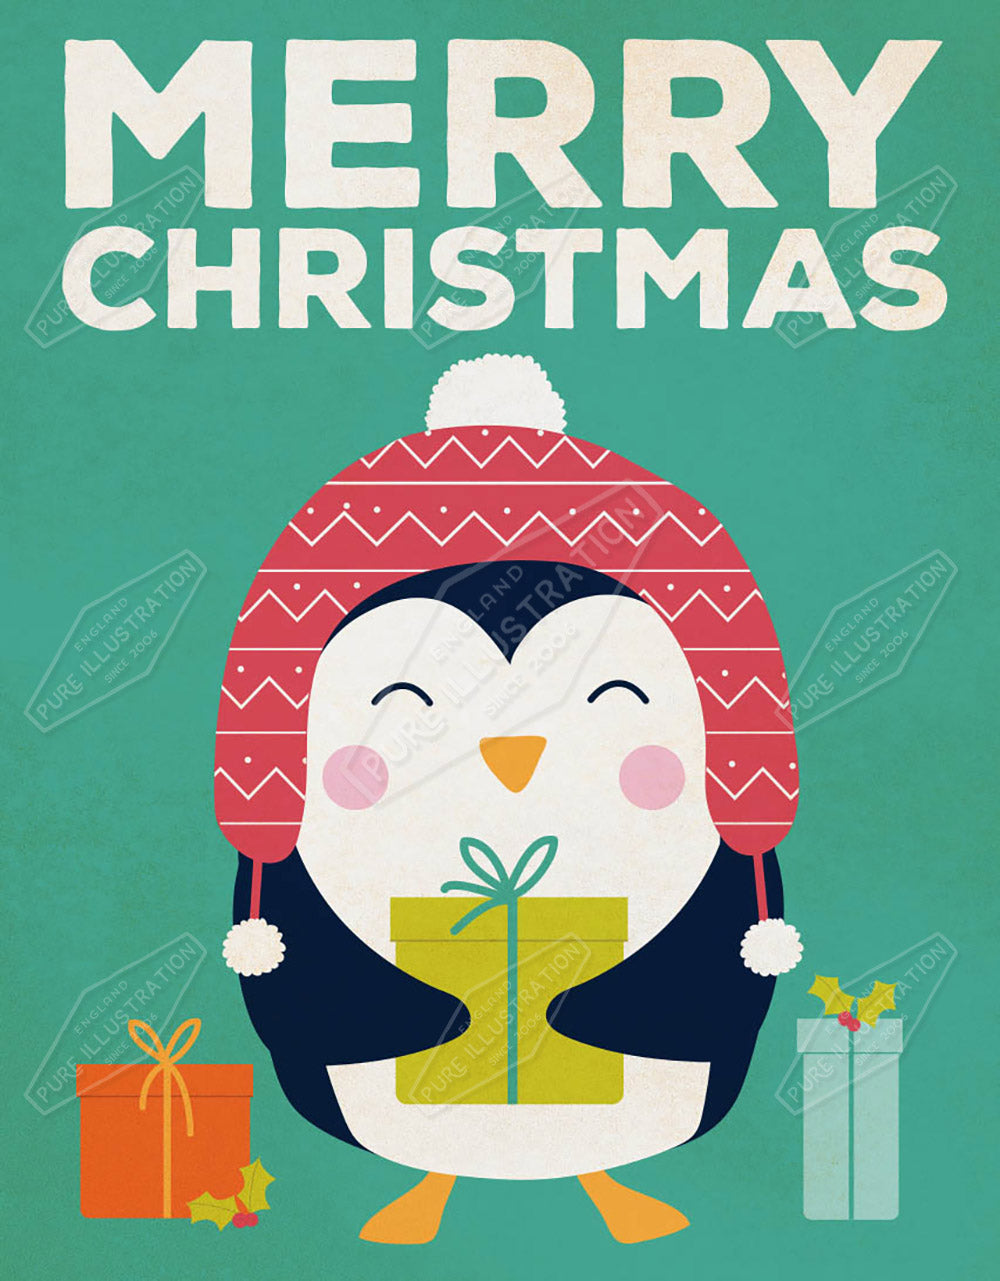 00029172JPH - Jessica Philpott is represented by Pure Art Licensing Agency - Christmas Greeting Card Design